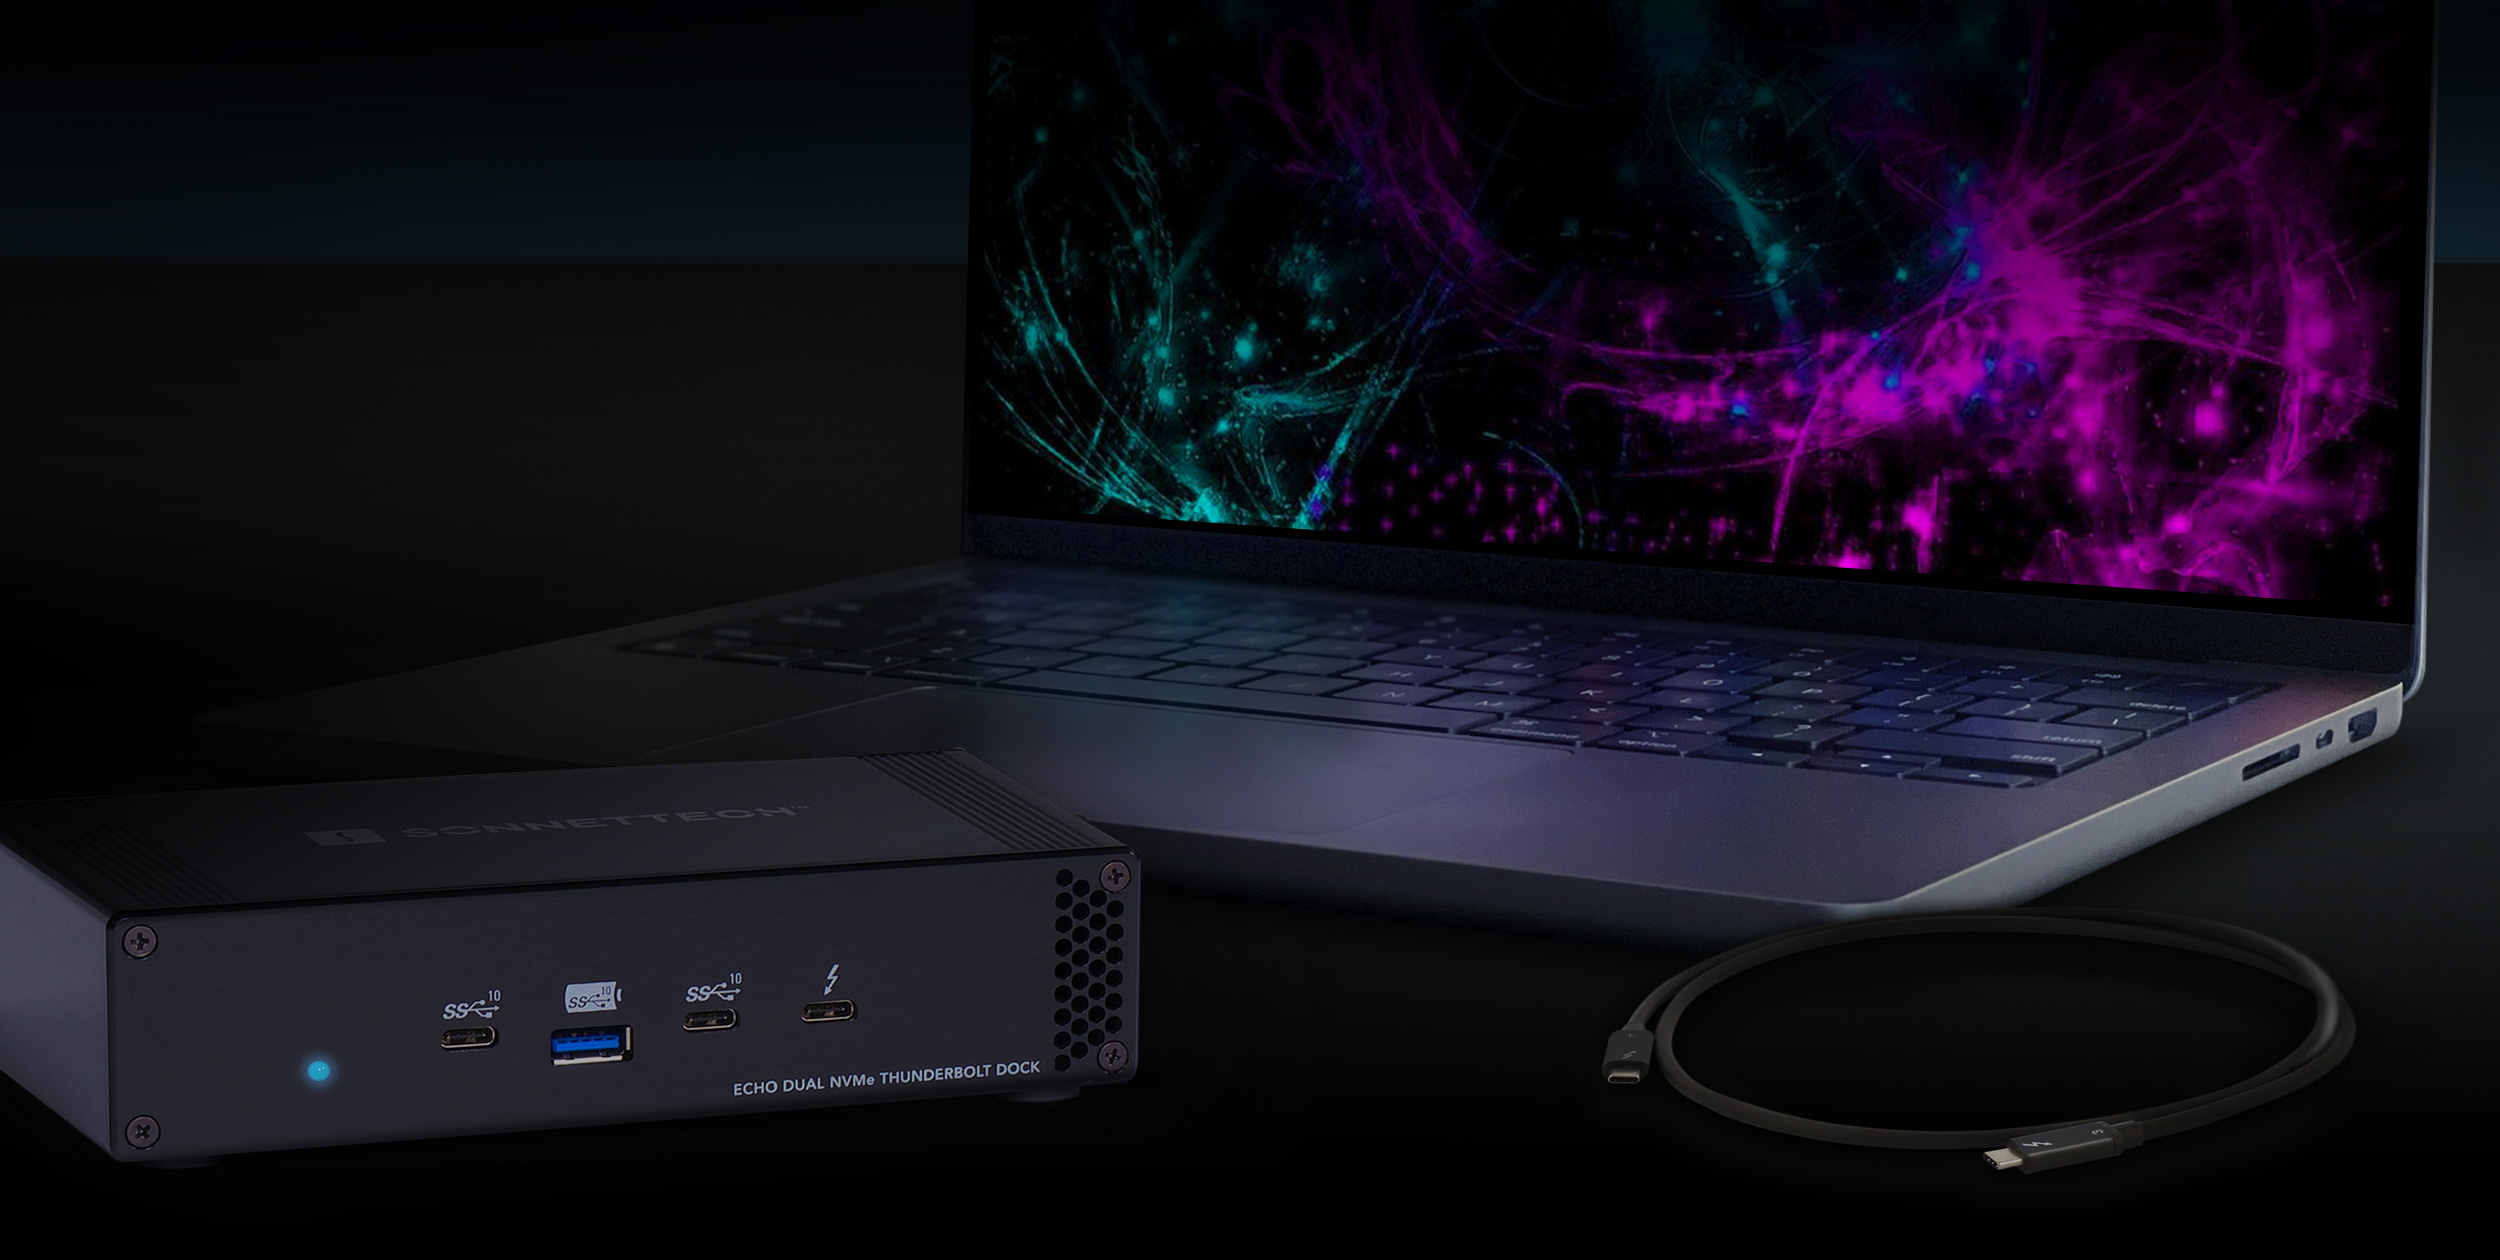 Sonnet Echo Dual NVMe Thunderbolt Dock with MacBook Pro